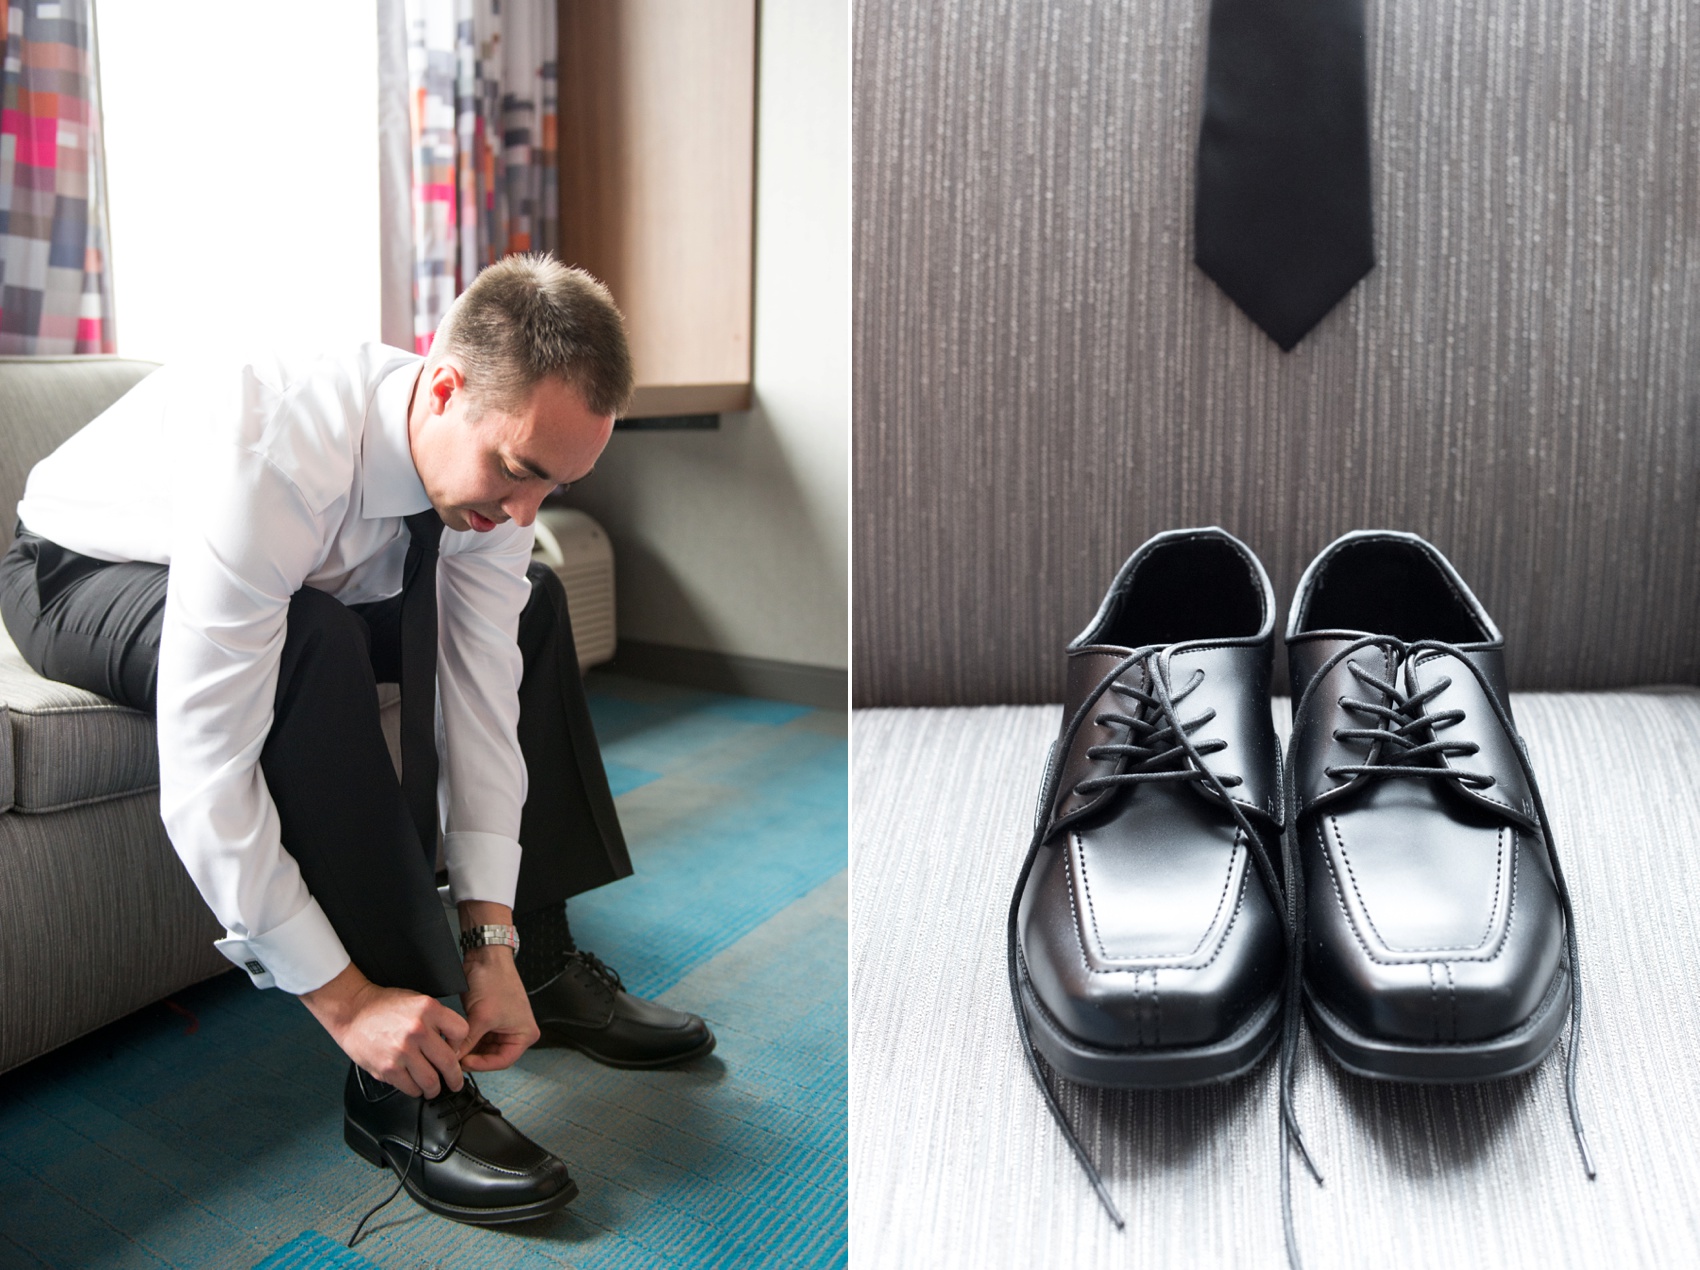 Bay 7 wedding photos by Mikkel Paige Photography. Raleigh wedding photographer captures the groom preparing.